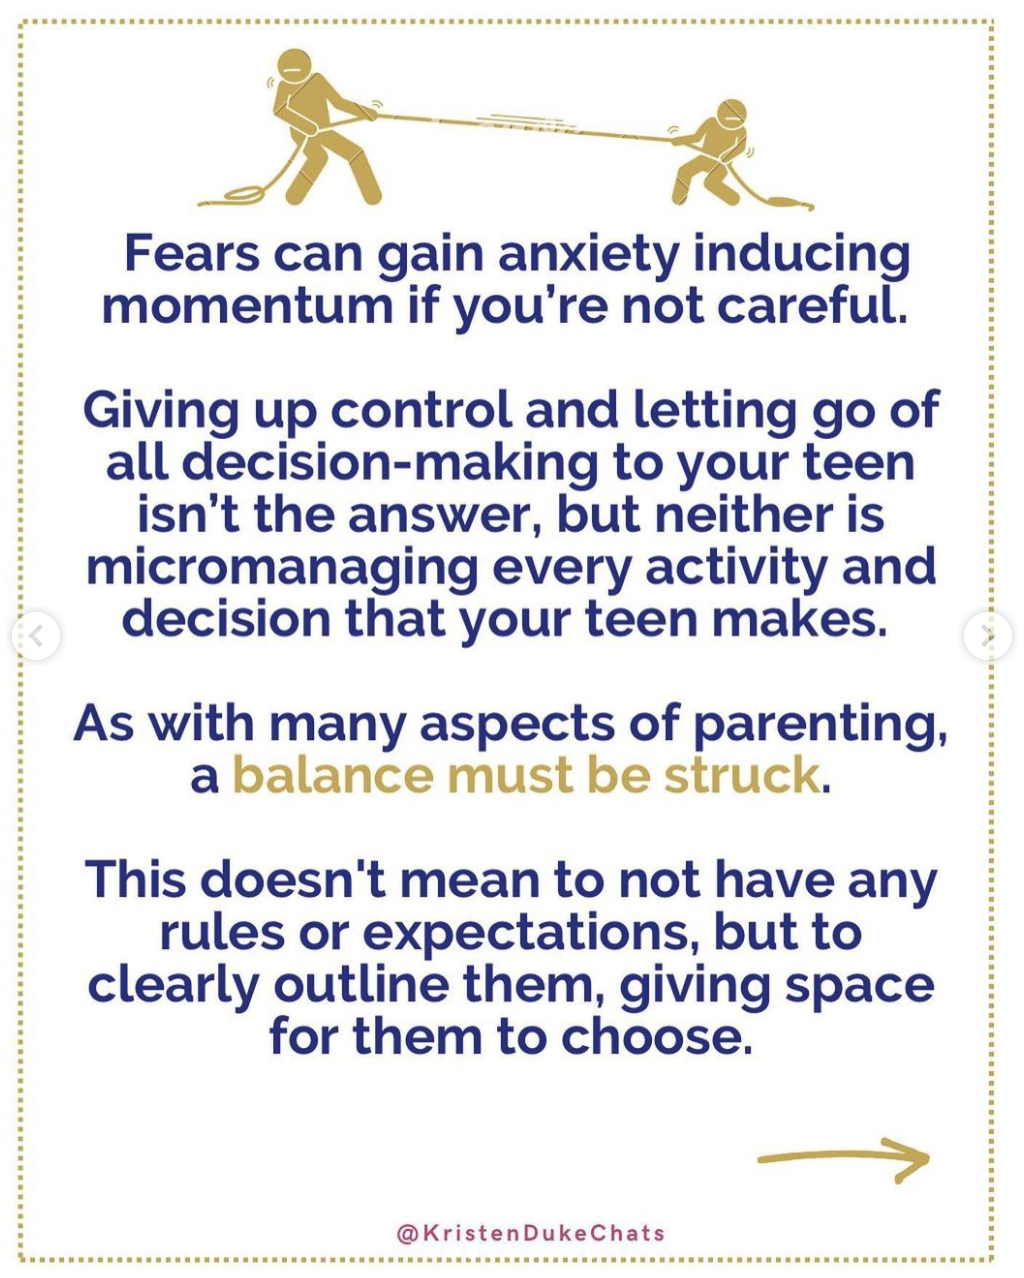 parent fears can be anxiety inducing